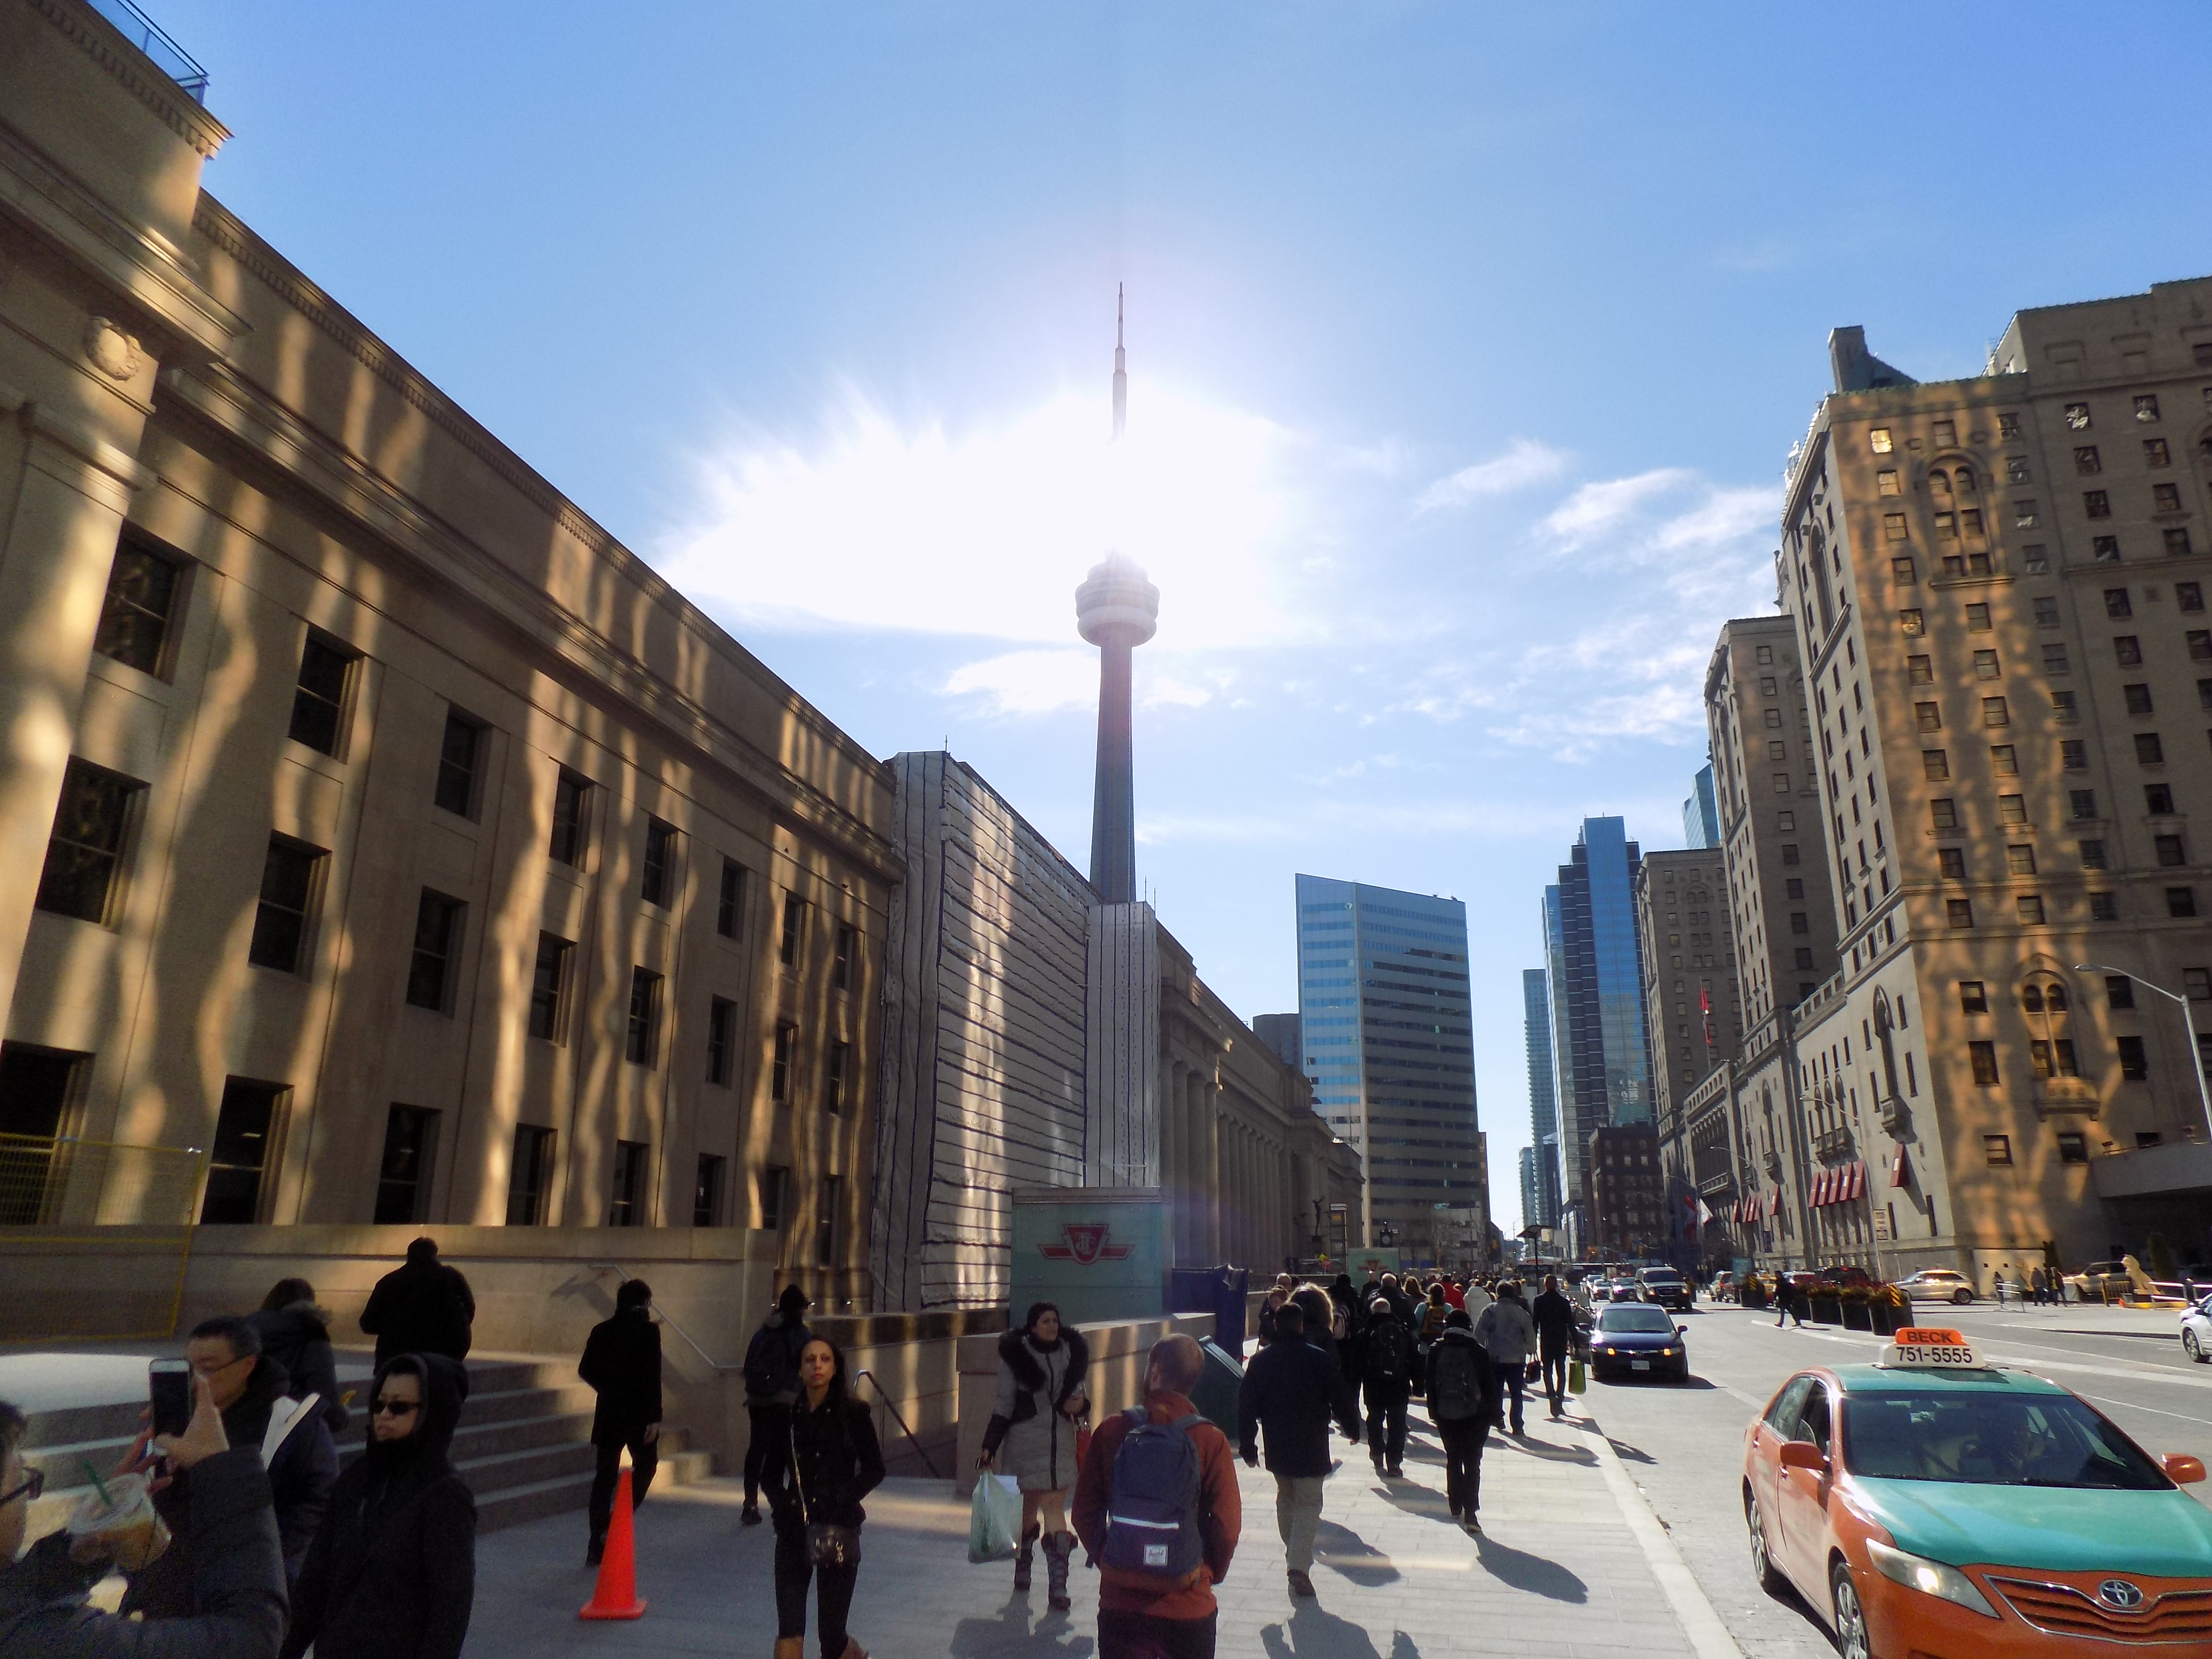 Union Station in Toronto on the left with the CN Tower reaching for the sun in the background.  The Royal York Hotel is on the right.  Photo: James Morgan